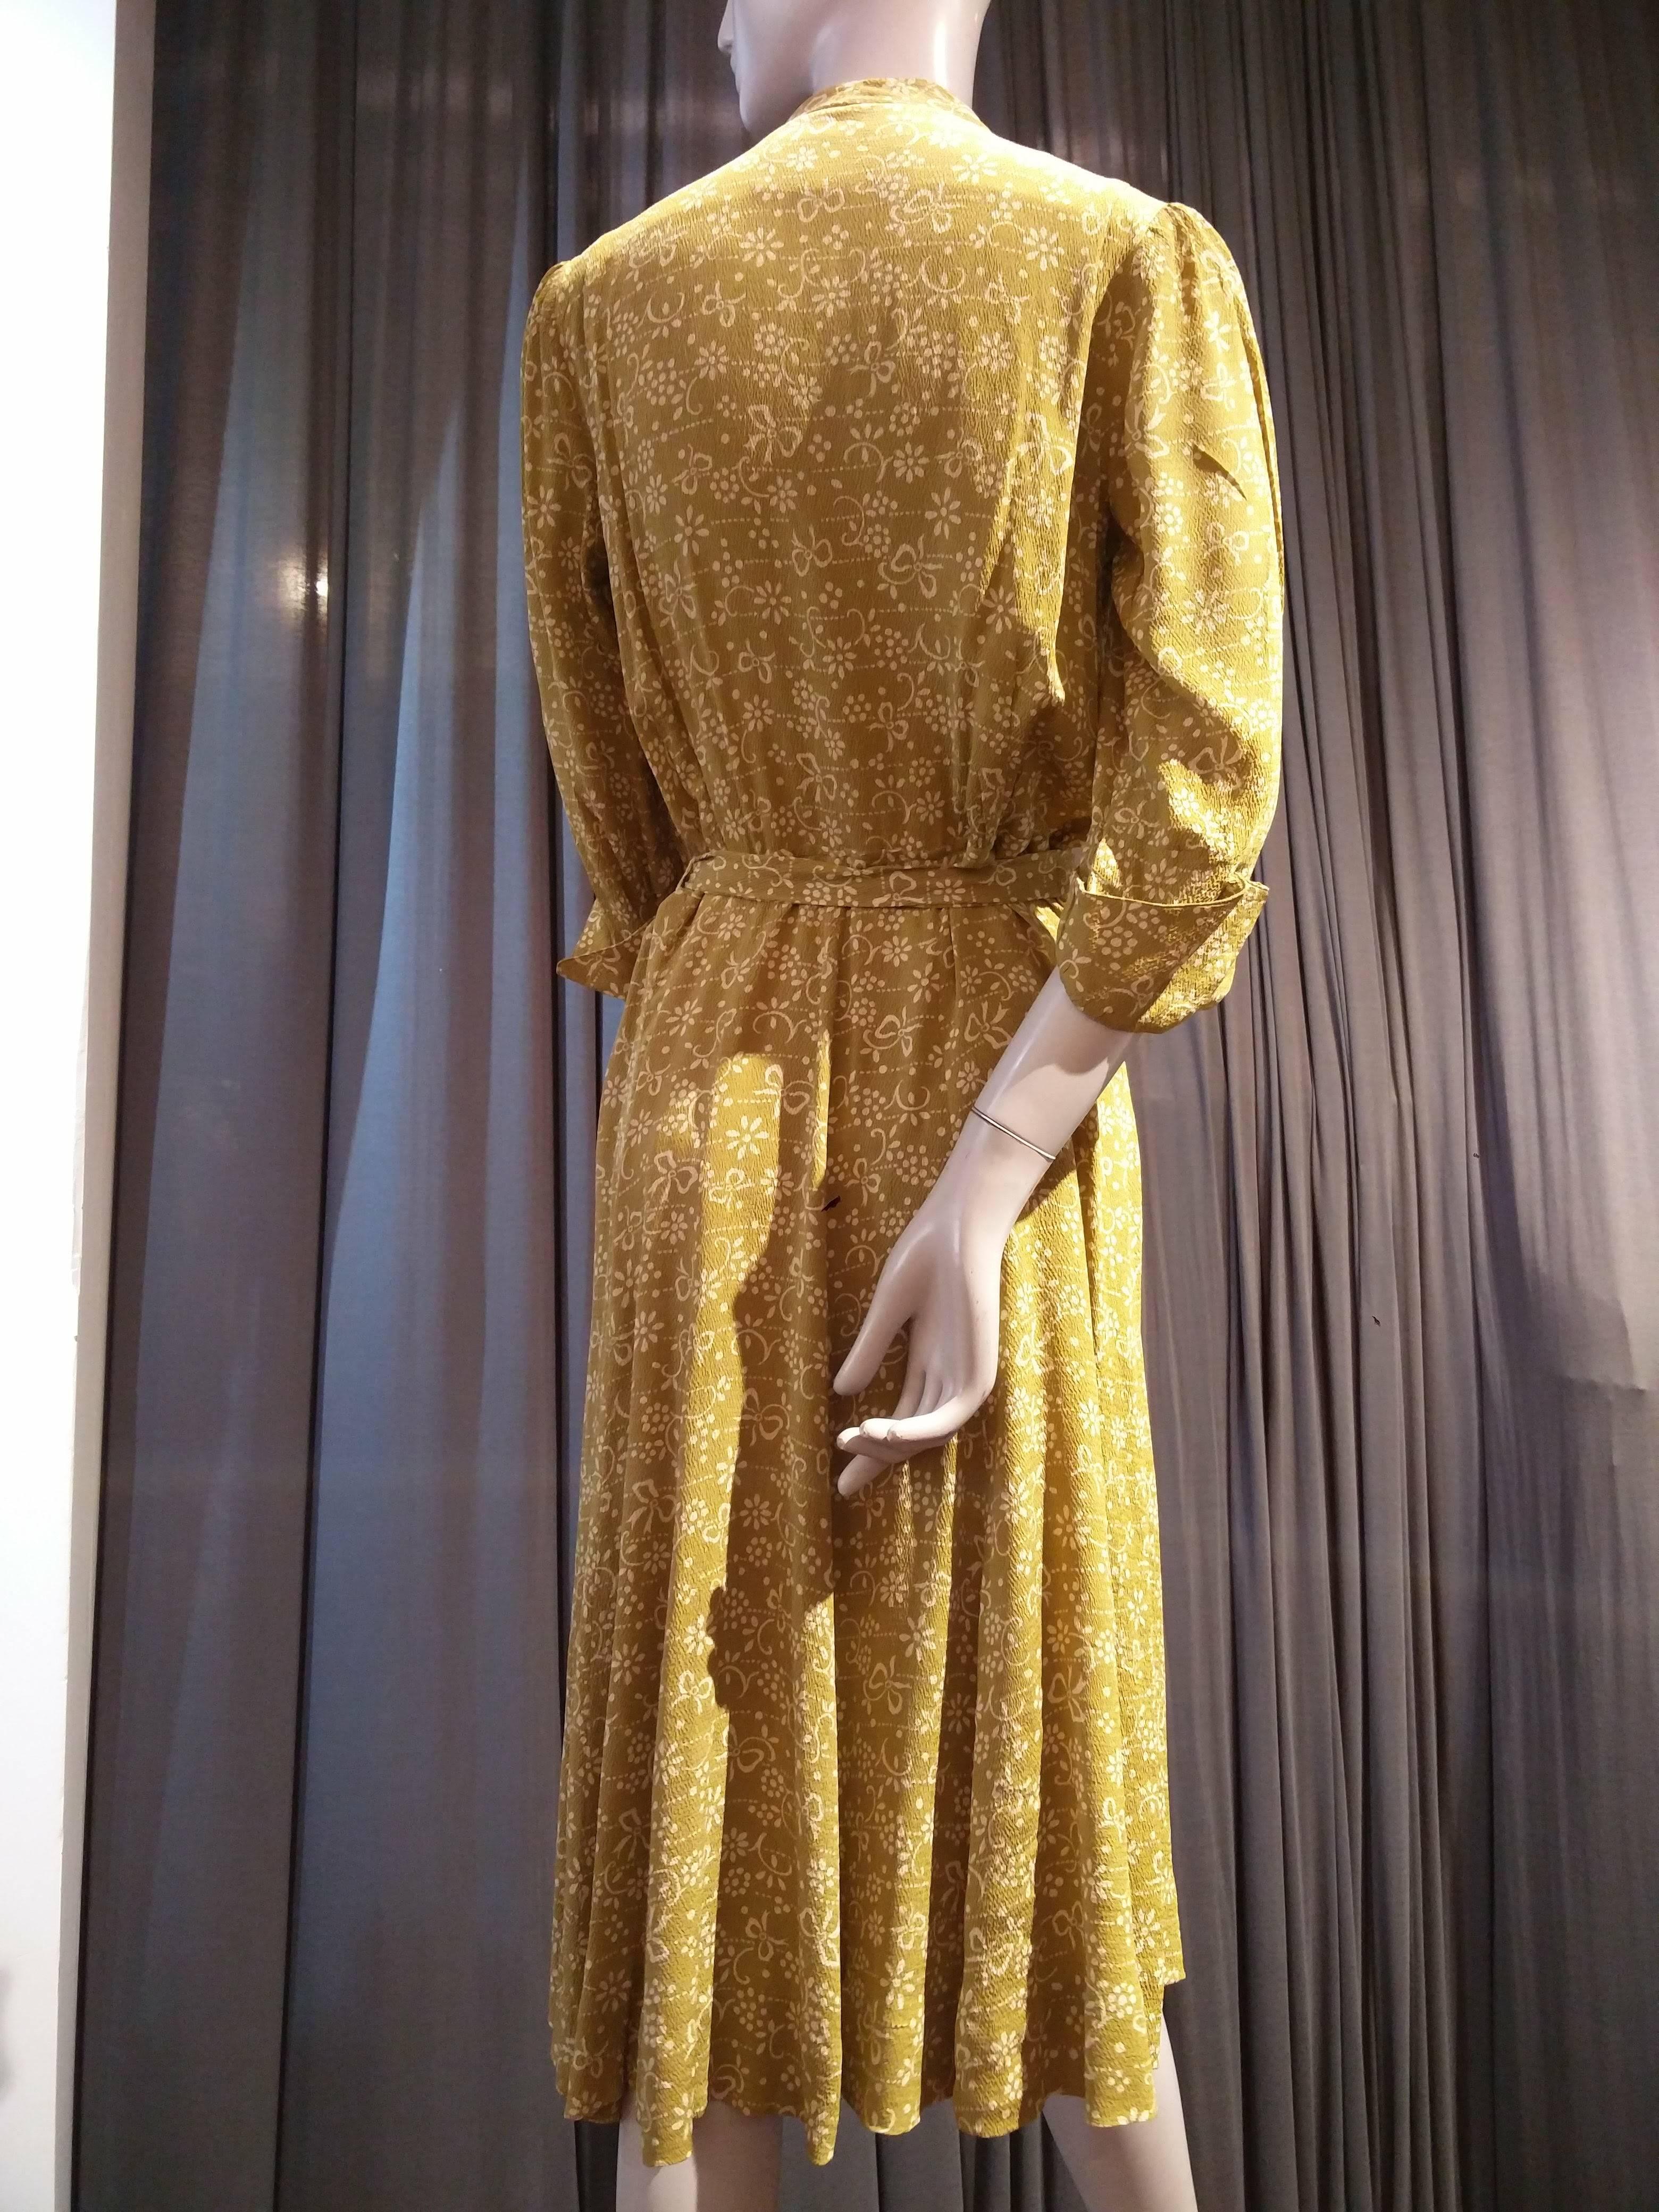 A fantastic and hard-to-find iconic 1940s Eisenberg and Sons gold and white floral print lightweight silk crepe dress: fitted shoulders with blouson bodice and sleeves with gathered cuff.  Faux pocket flaps at top of bust. Eisenberg and Sons were